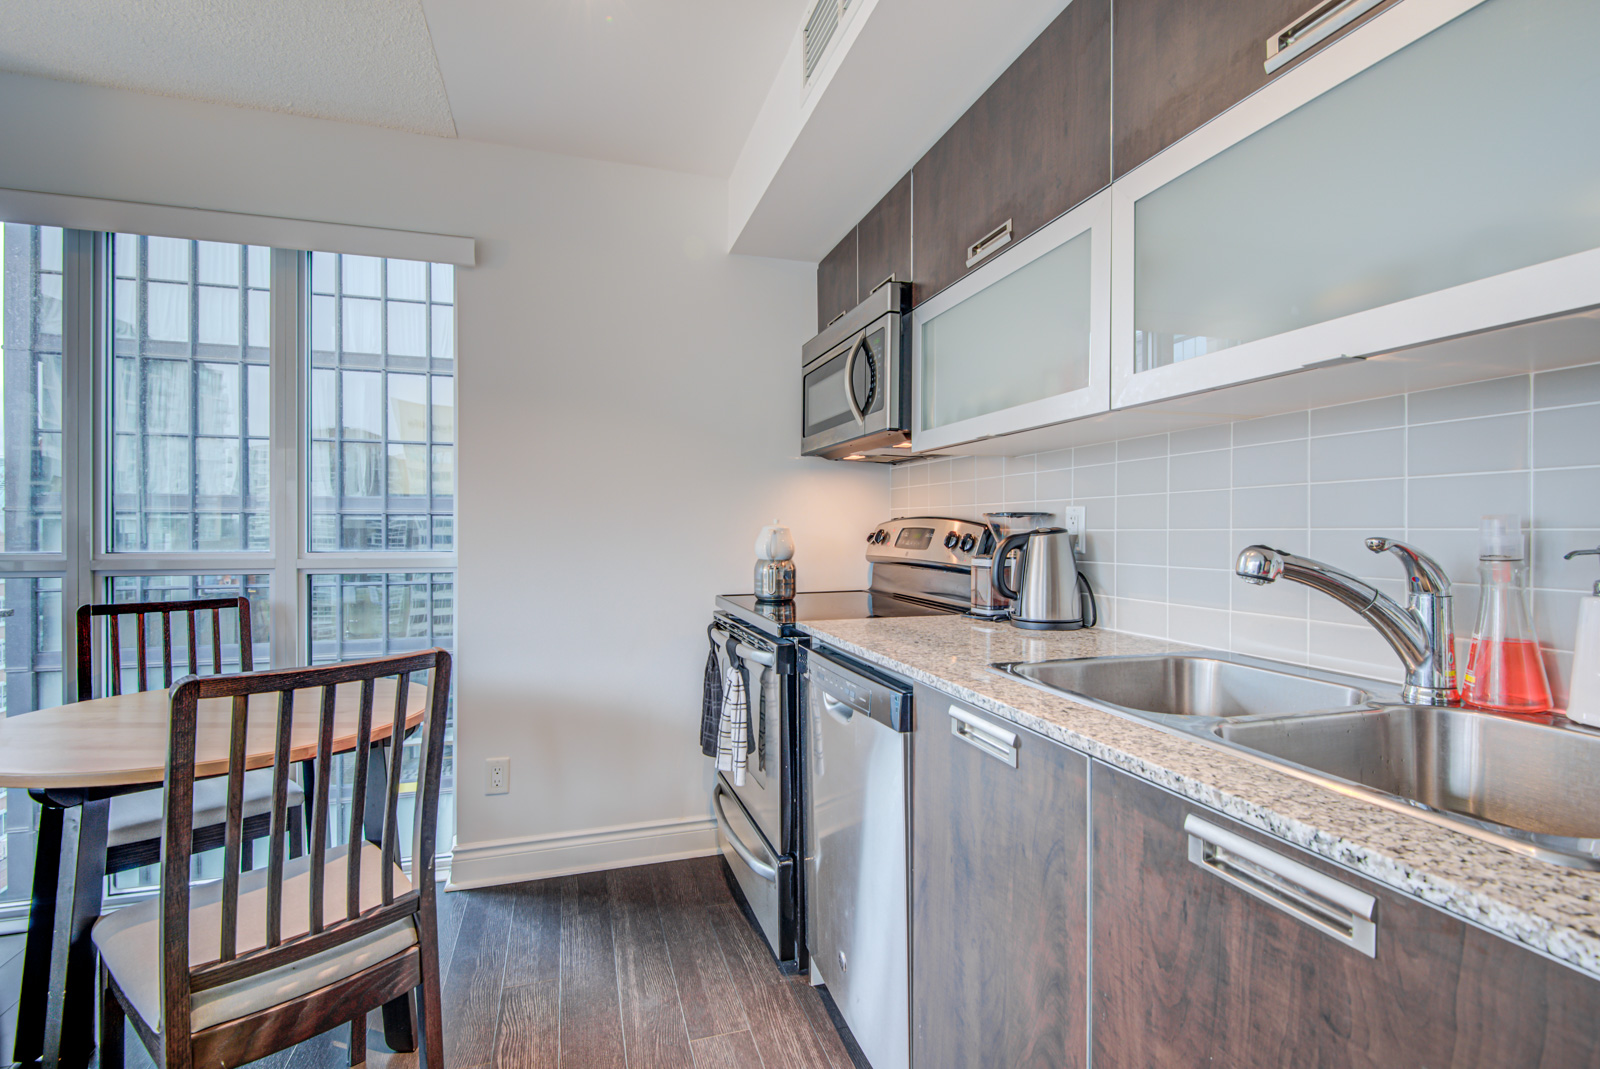 Linear kitchen of 28 Ted Rogers Unit 1702 with built-in appliances, wooden cupboards and frosted-glass shelves.